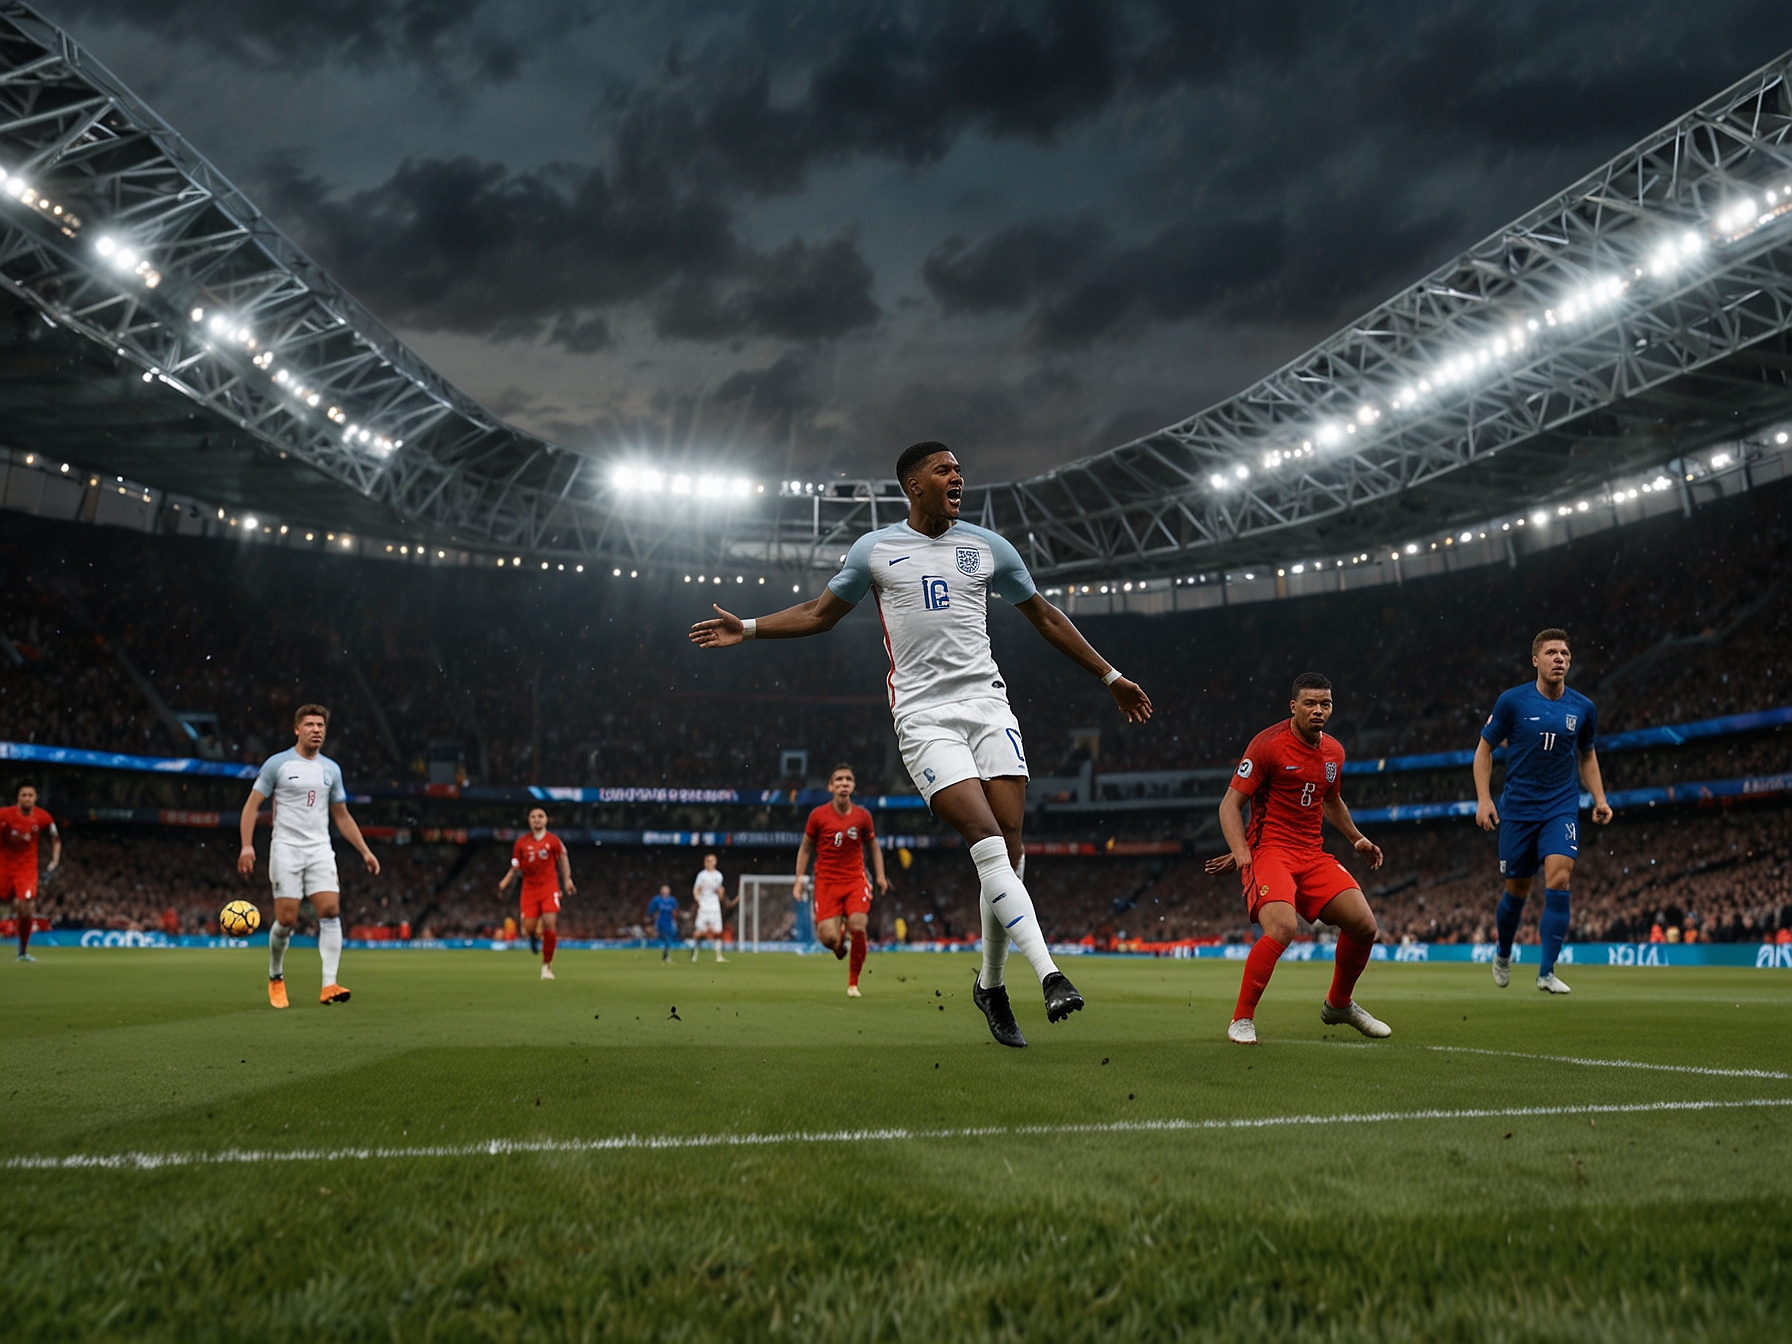 Action shot from the 2017 match between England and Slovakia, capturing Marcus Rashford scoring the winning goal that secured England's pivotal 2-1 victory at Wembley Stadium.